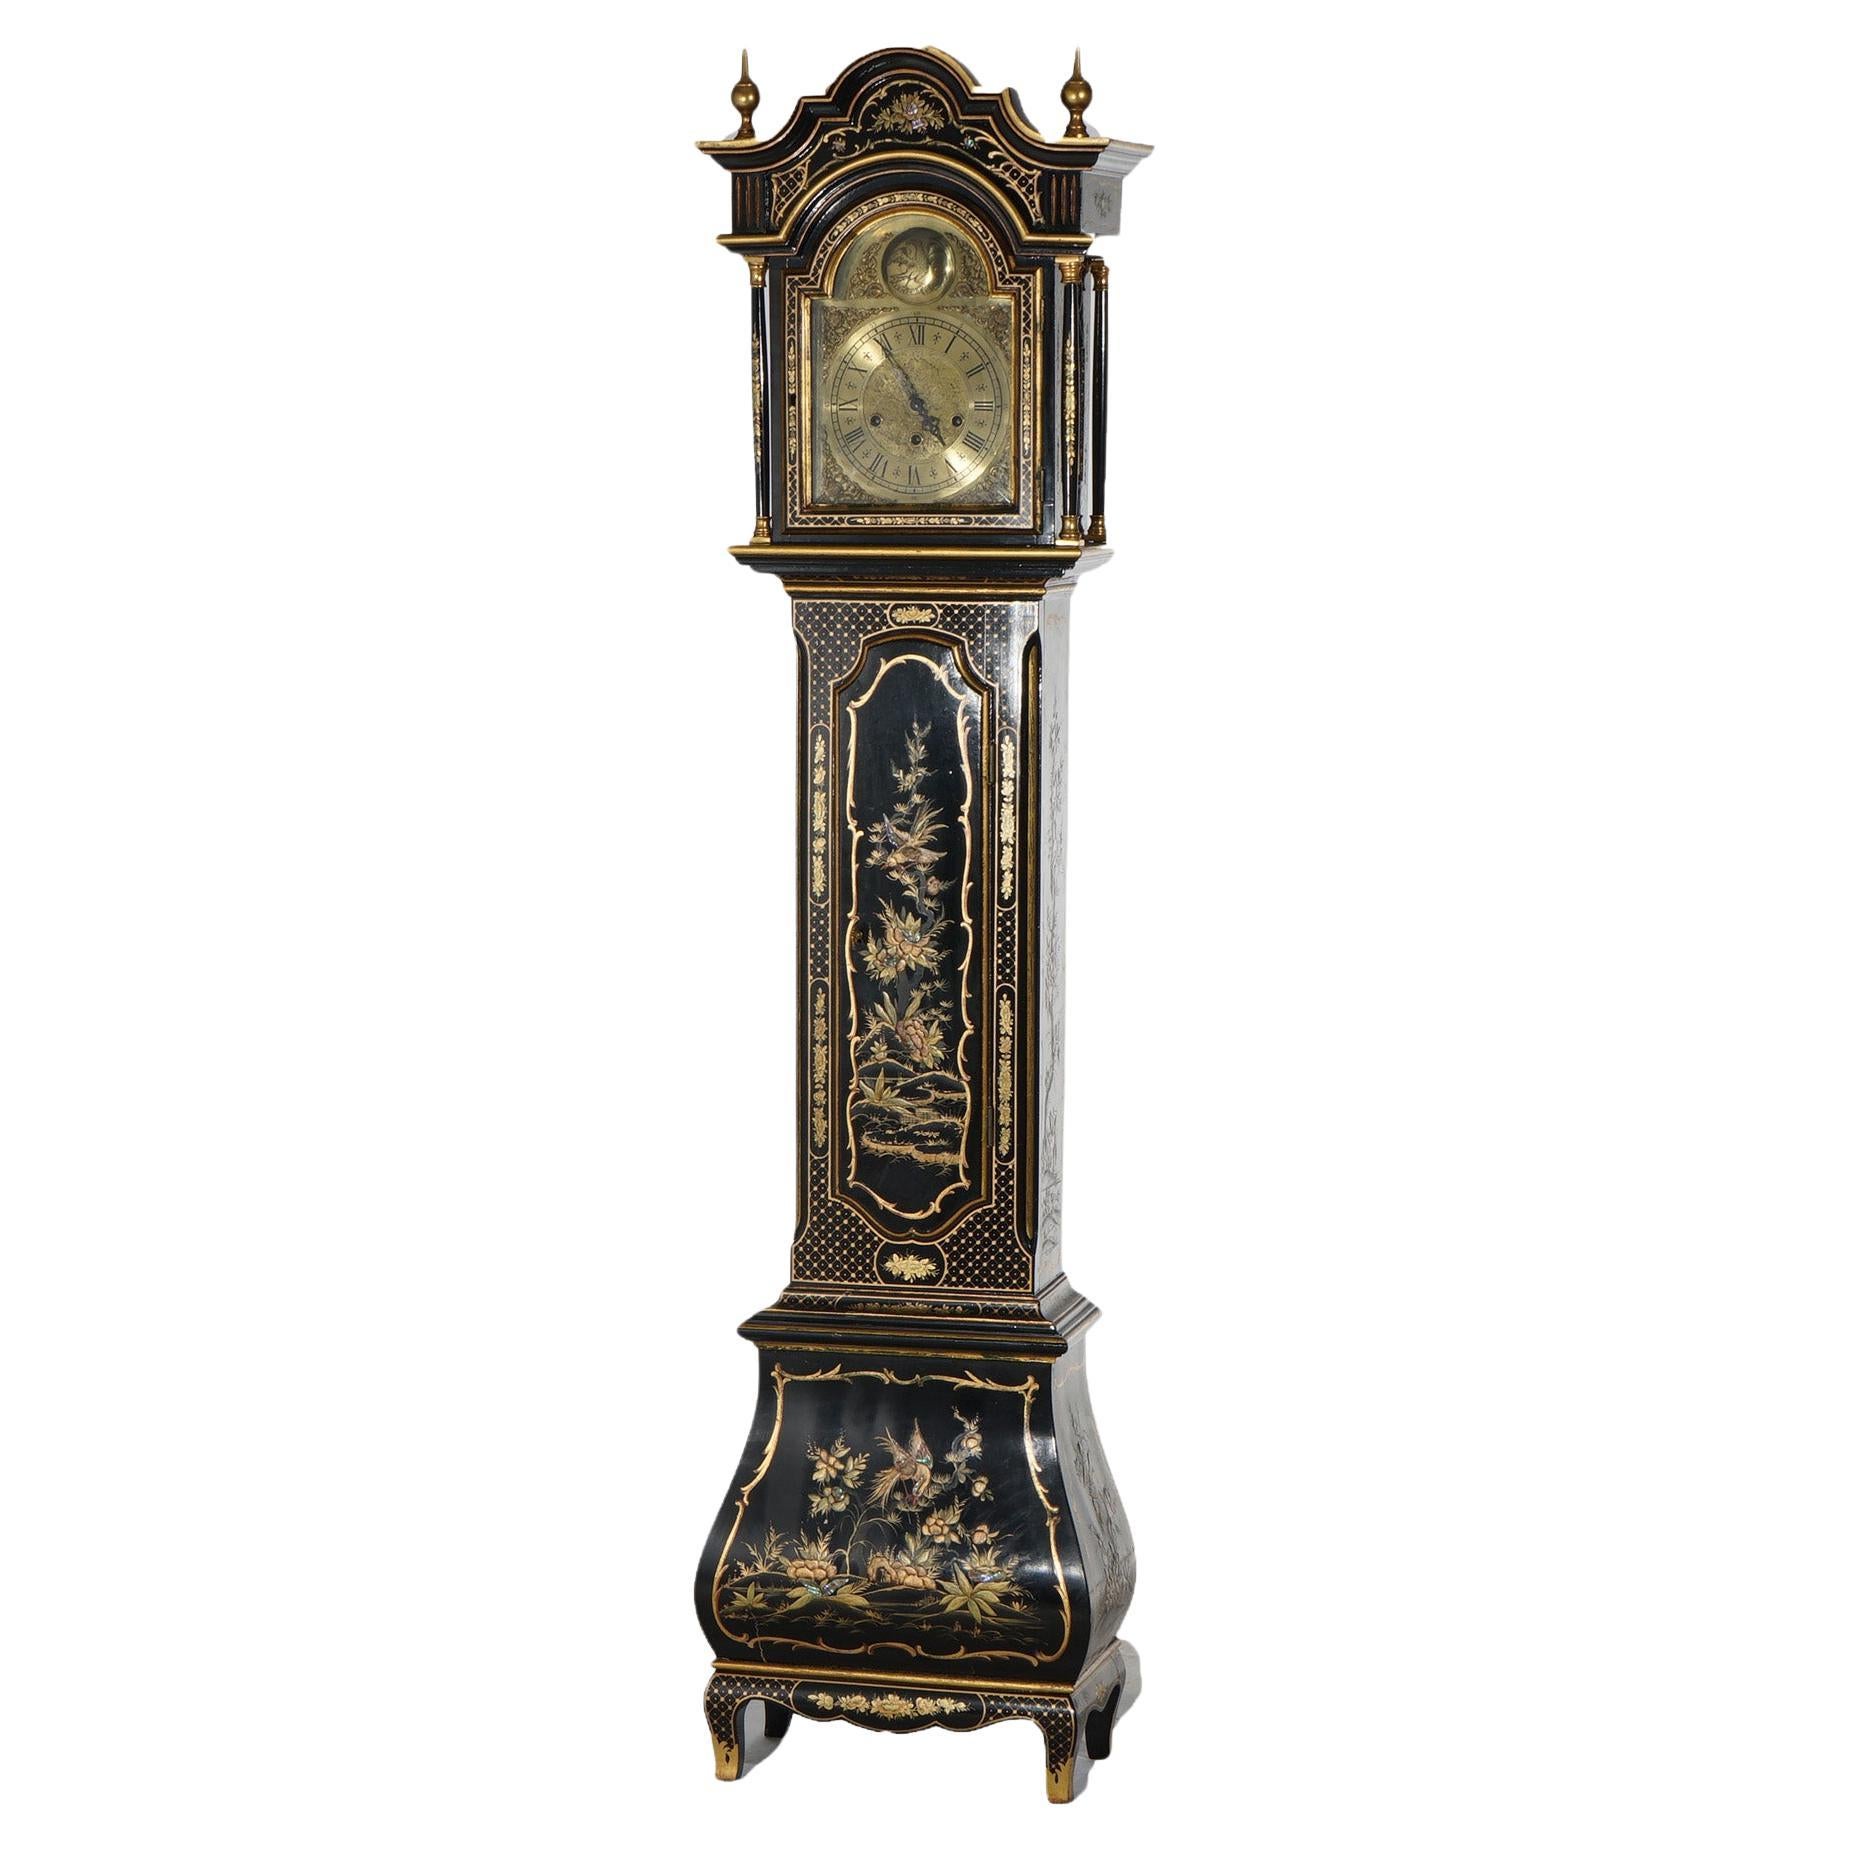 German Chinoiserie Gilt Decorated Black Lacquer Petite Tall Case Clock 20th C